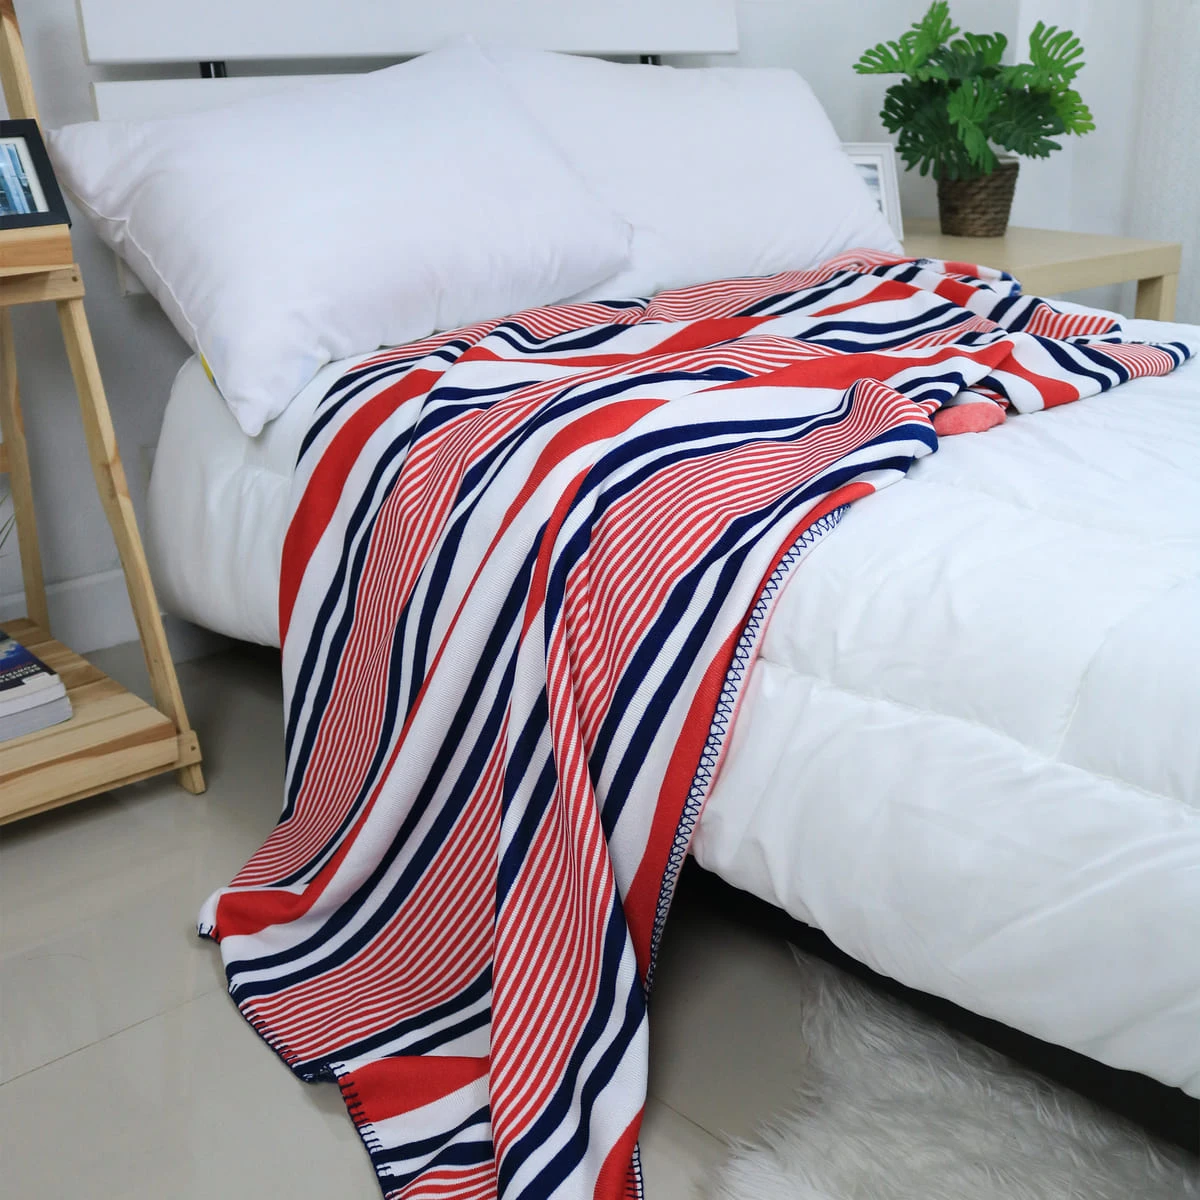 Classic Stripe Pattern Printed Sweater Blanket (Red,Navy,White)